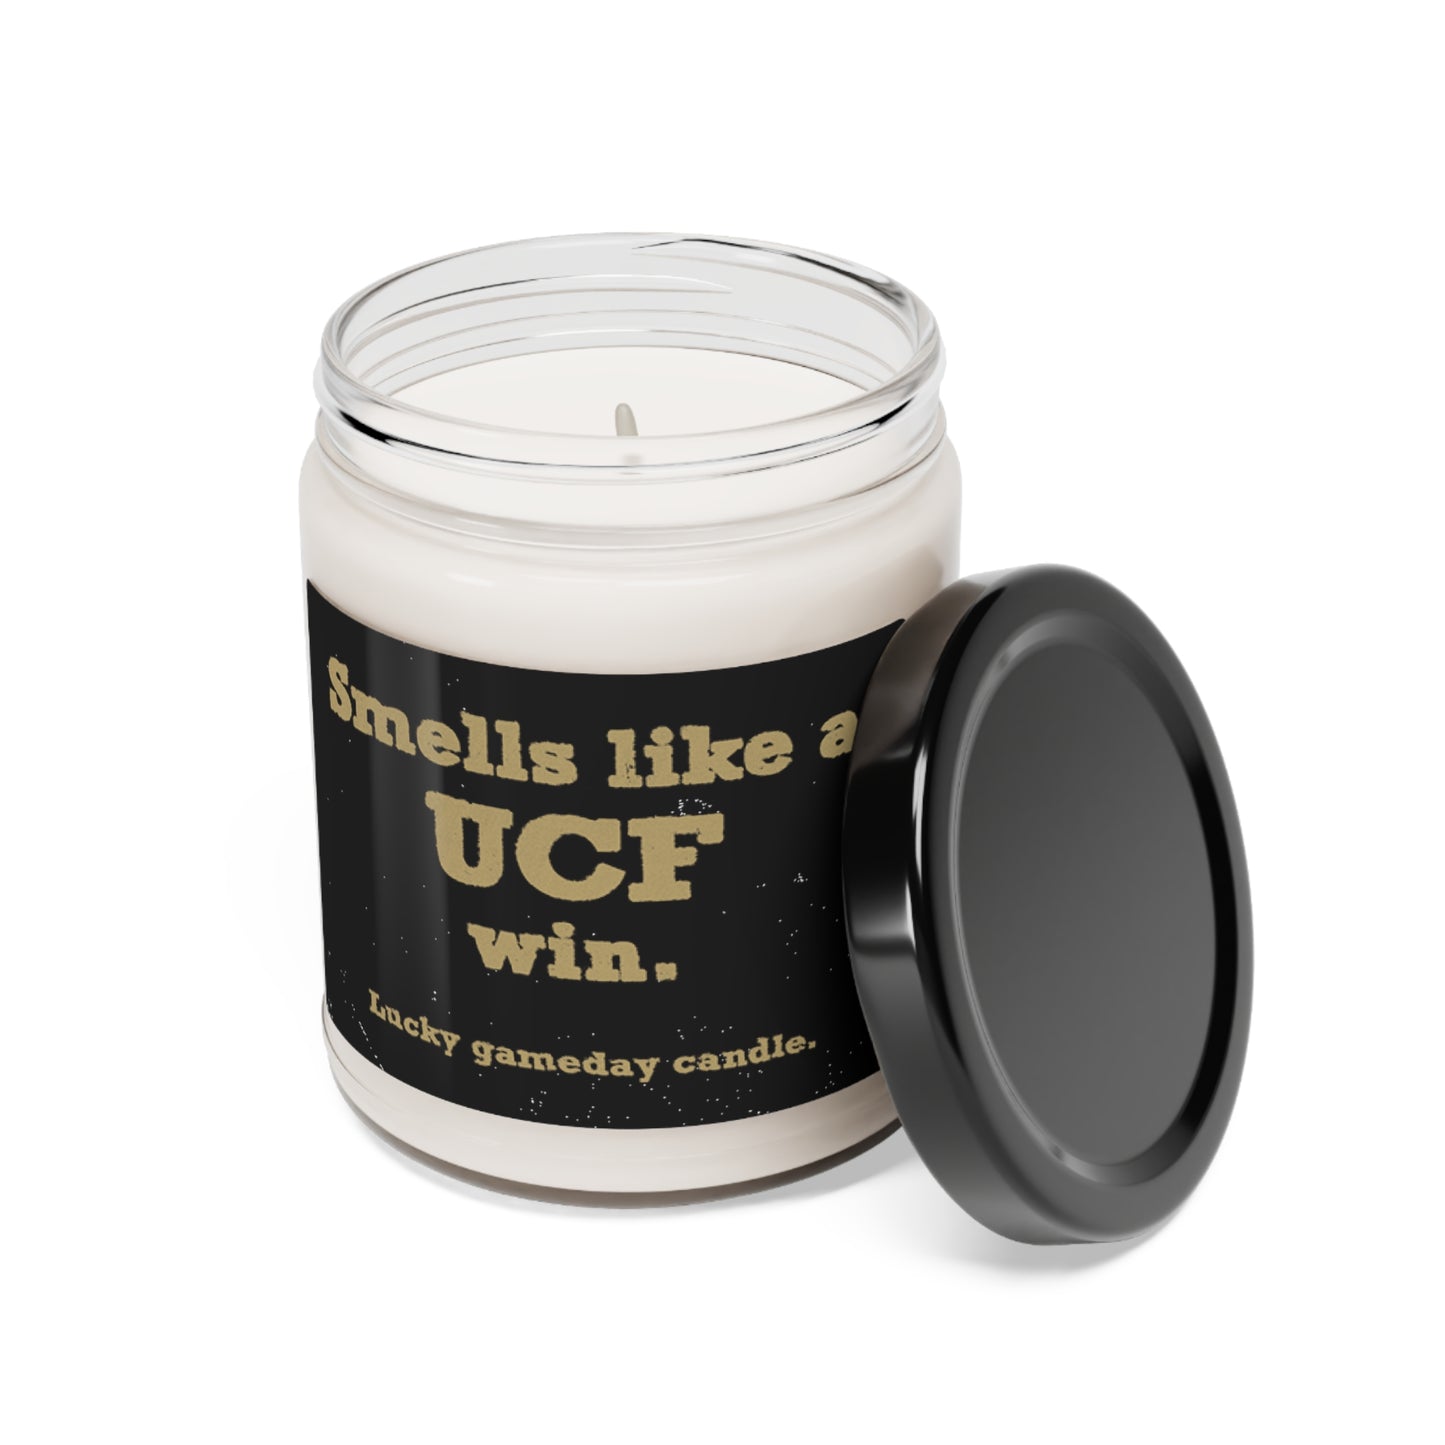 Central Florida - "Smells Like a UCF Win" Scented Candle